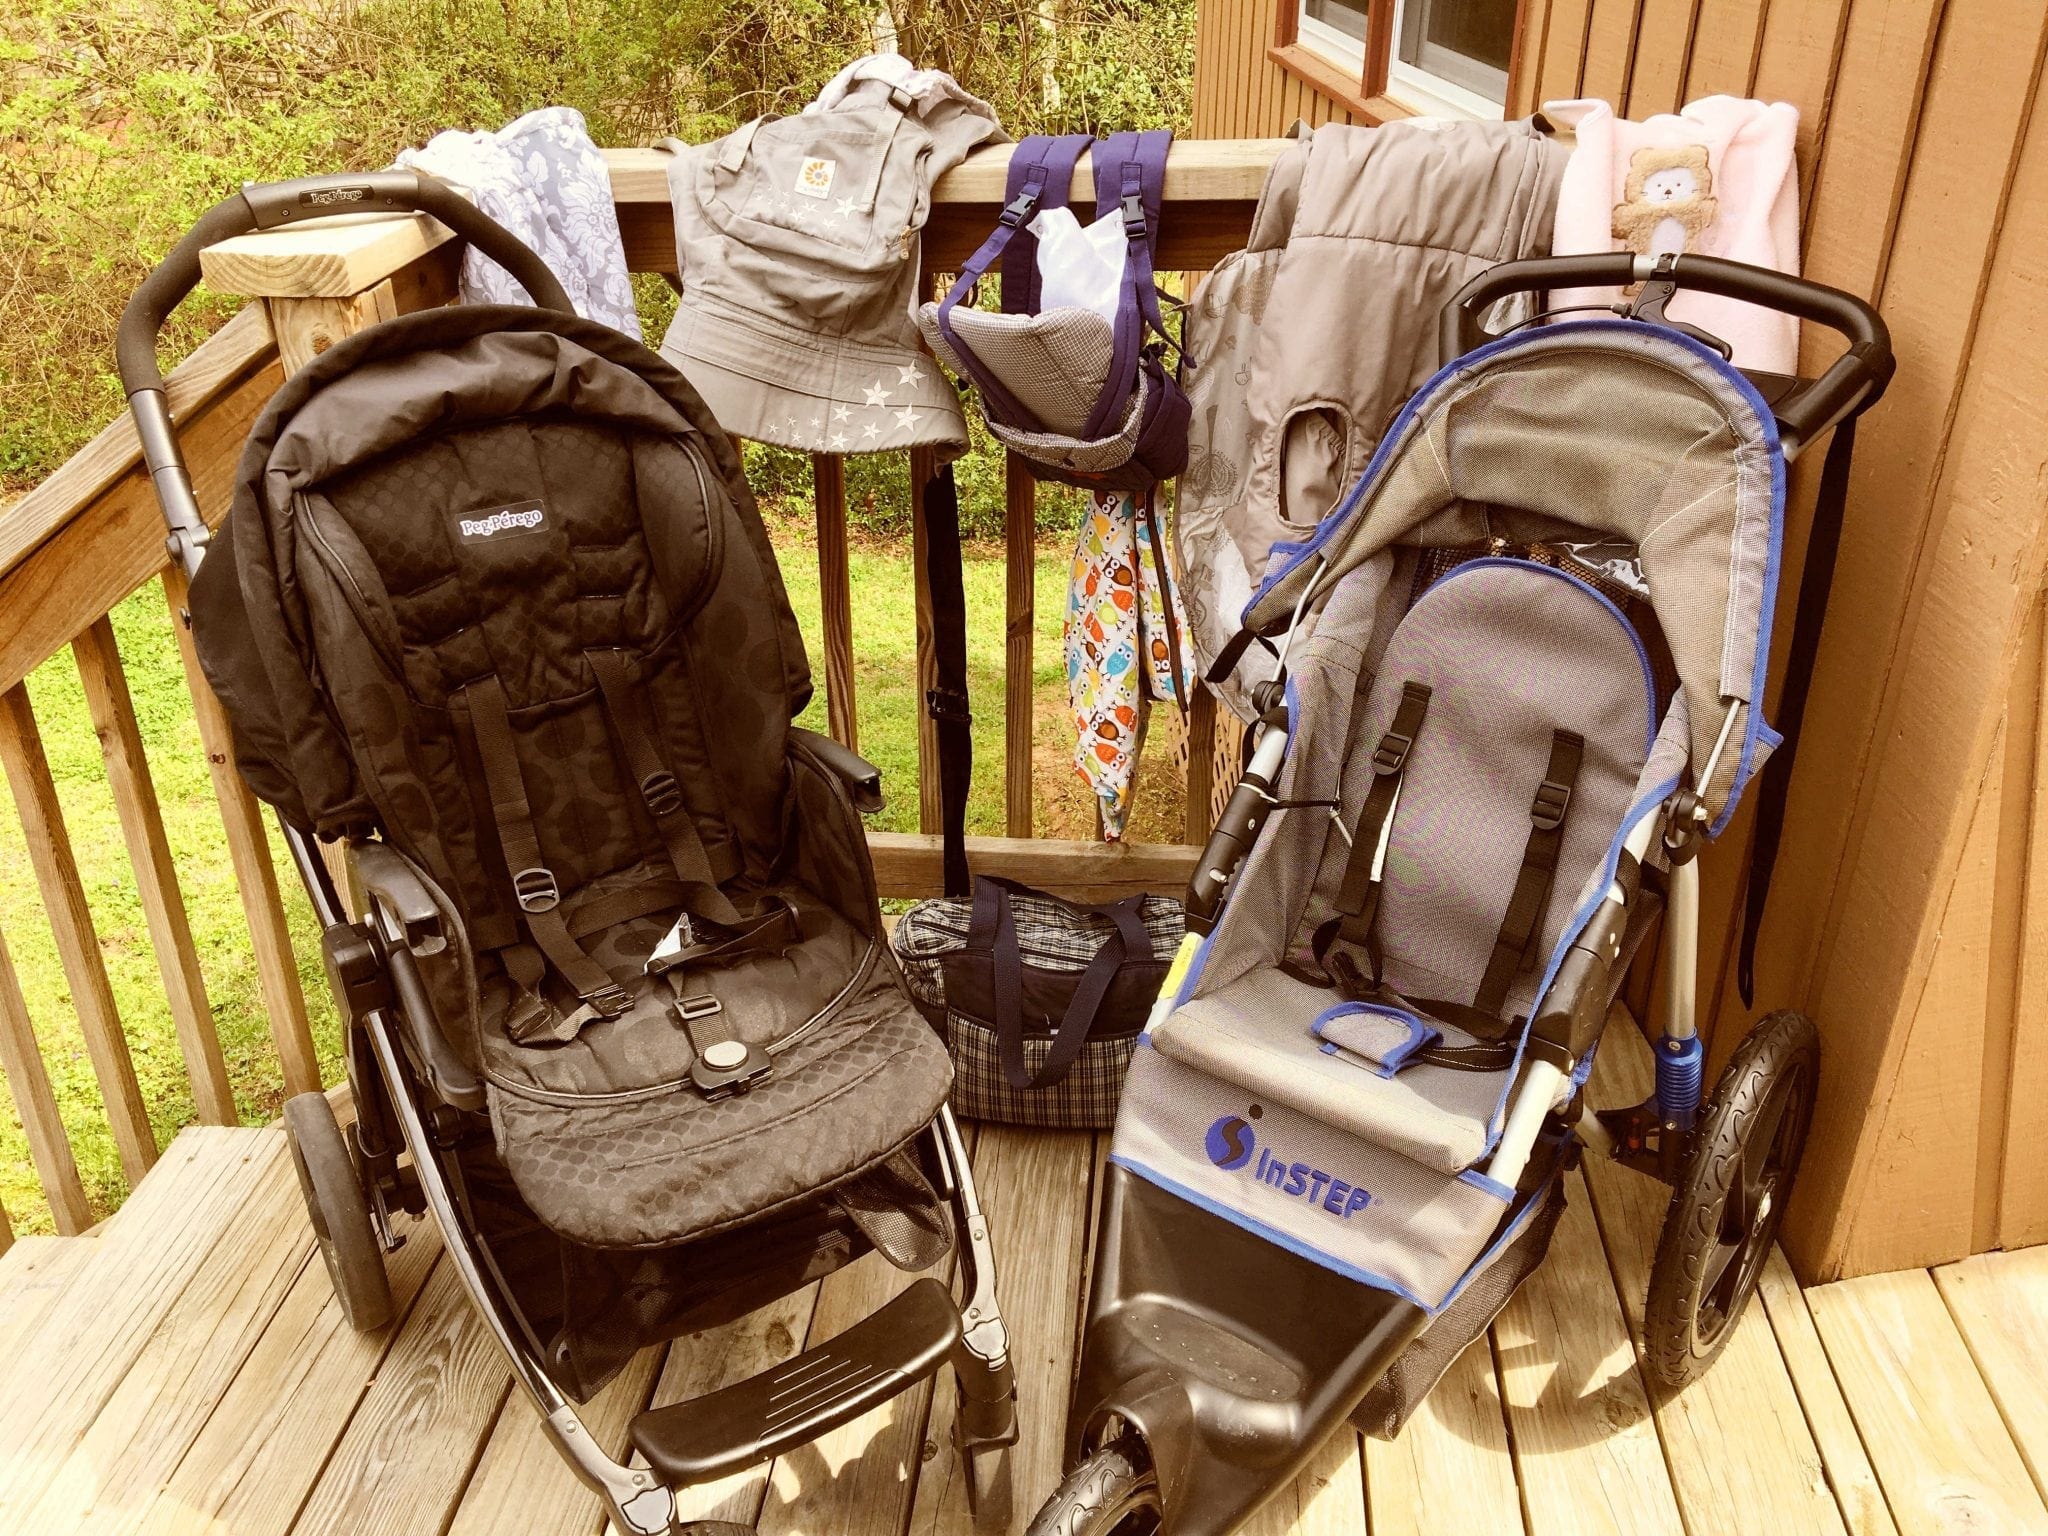 Secondhand Stroller, Running Stroller, Diaper Bags, Carriers, Nursing Cover, Grocery Cart Cover and Car Sear Blanket